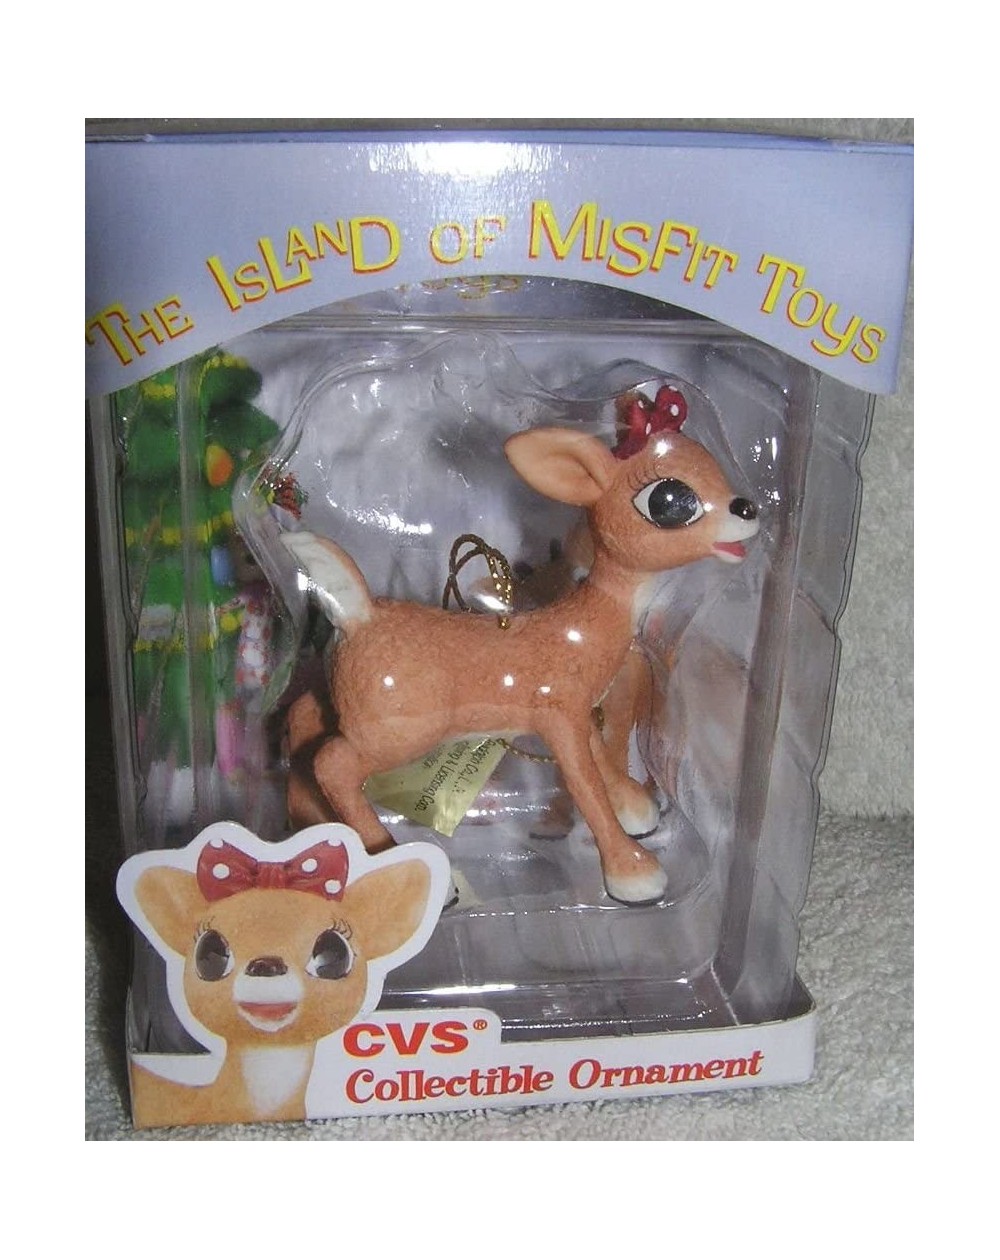 Ornaments 1999 CVS Limited Edition Clarice Reindeer Christmas Ornament from Rudolph and the Island of Misfit Toys - CF11B8N80...